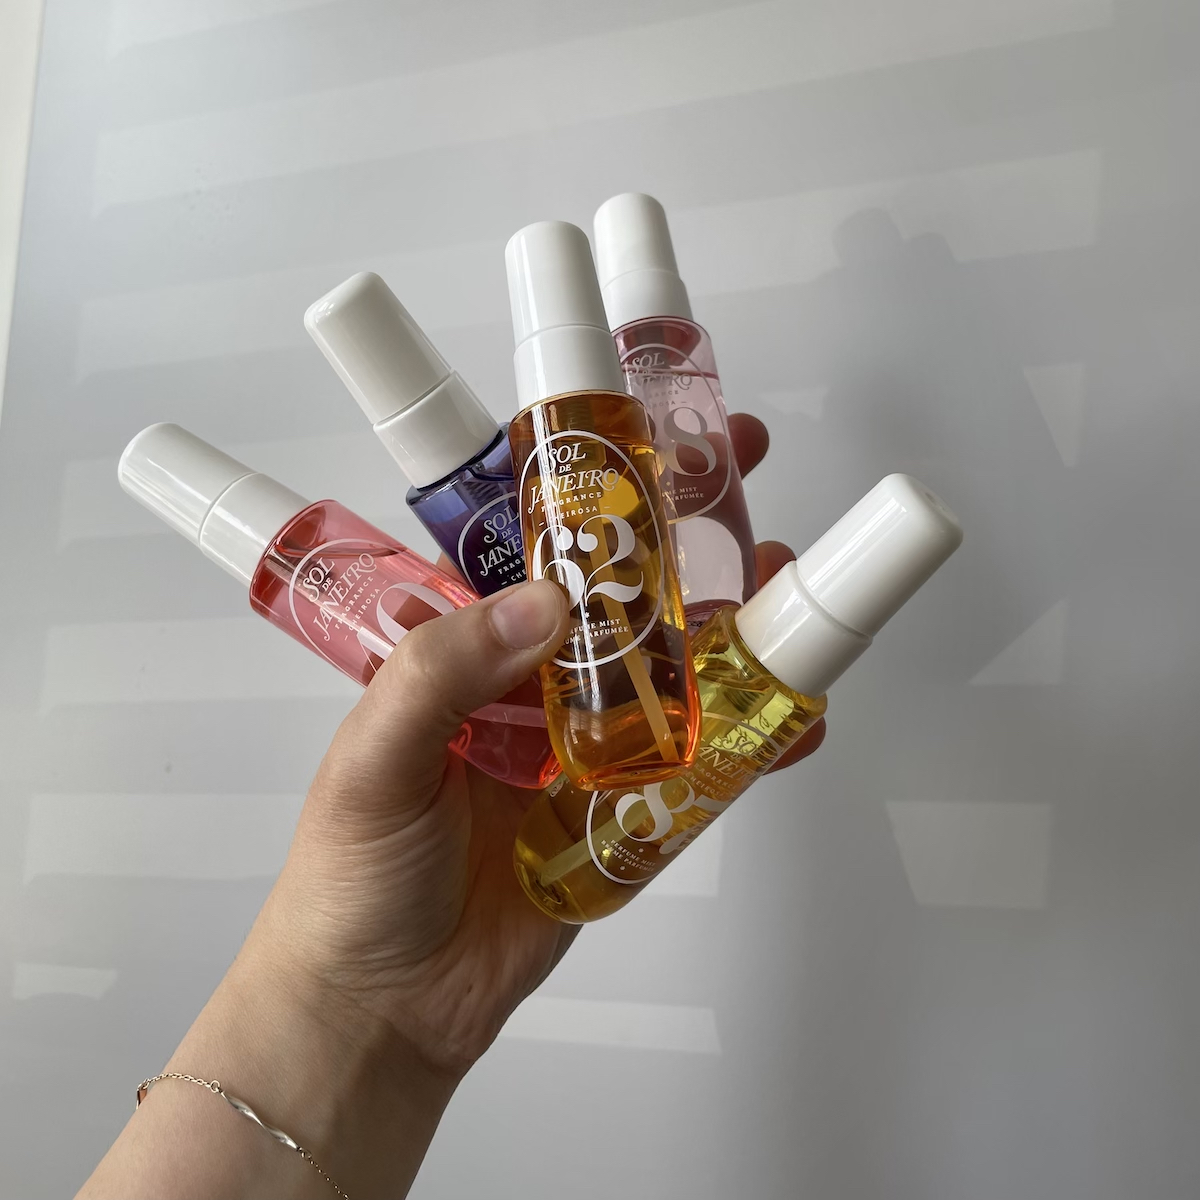 Trust Me: These Affordable Viral Body Mists Smell Just As Good As My Most Expensive Fragrances